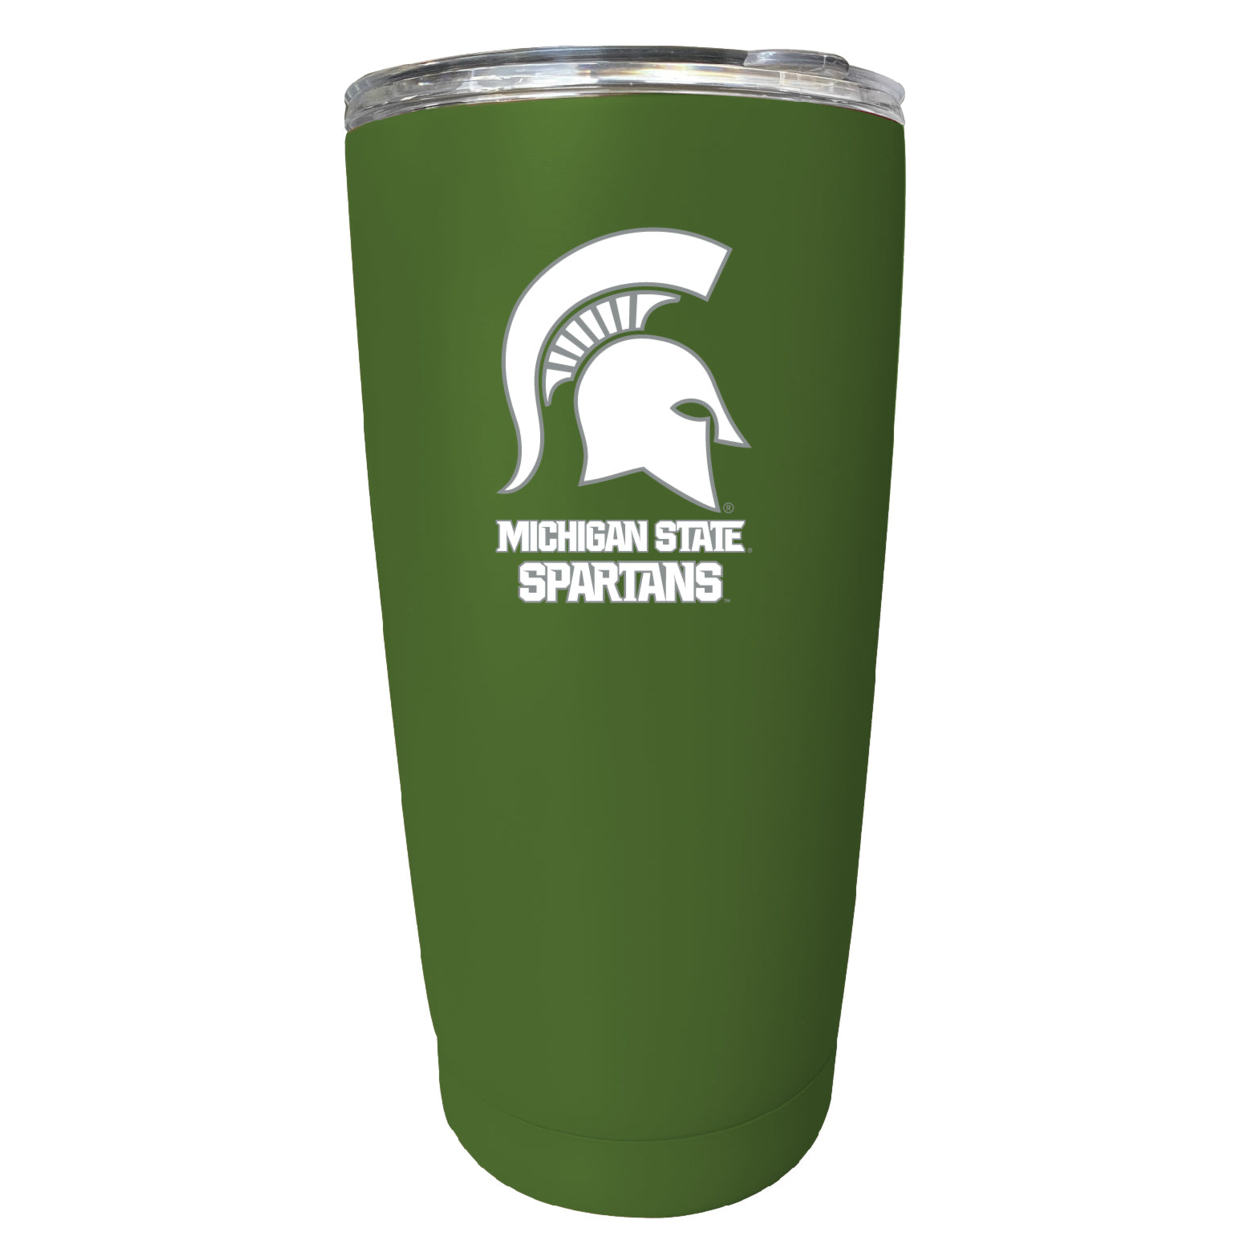 Michigan State Spartans 16 Oz Stainless Steel Insulated Tumbler - Gray